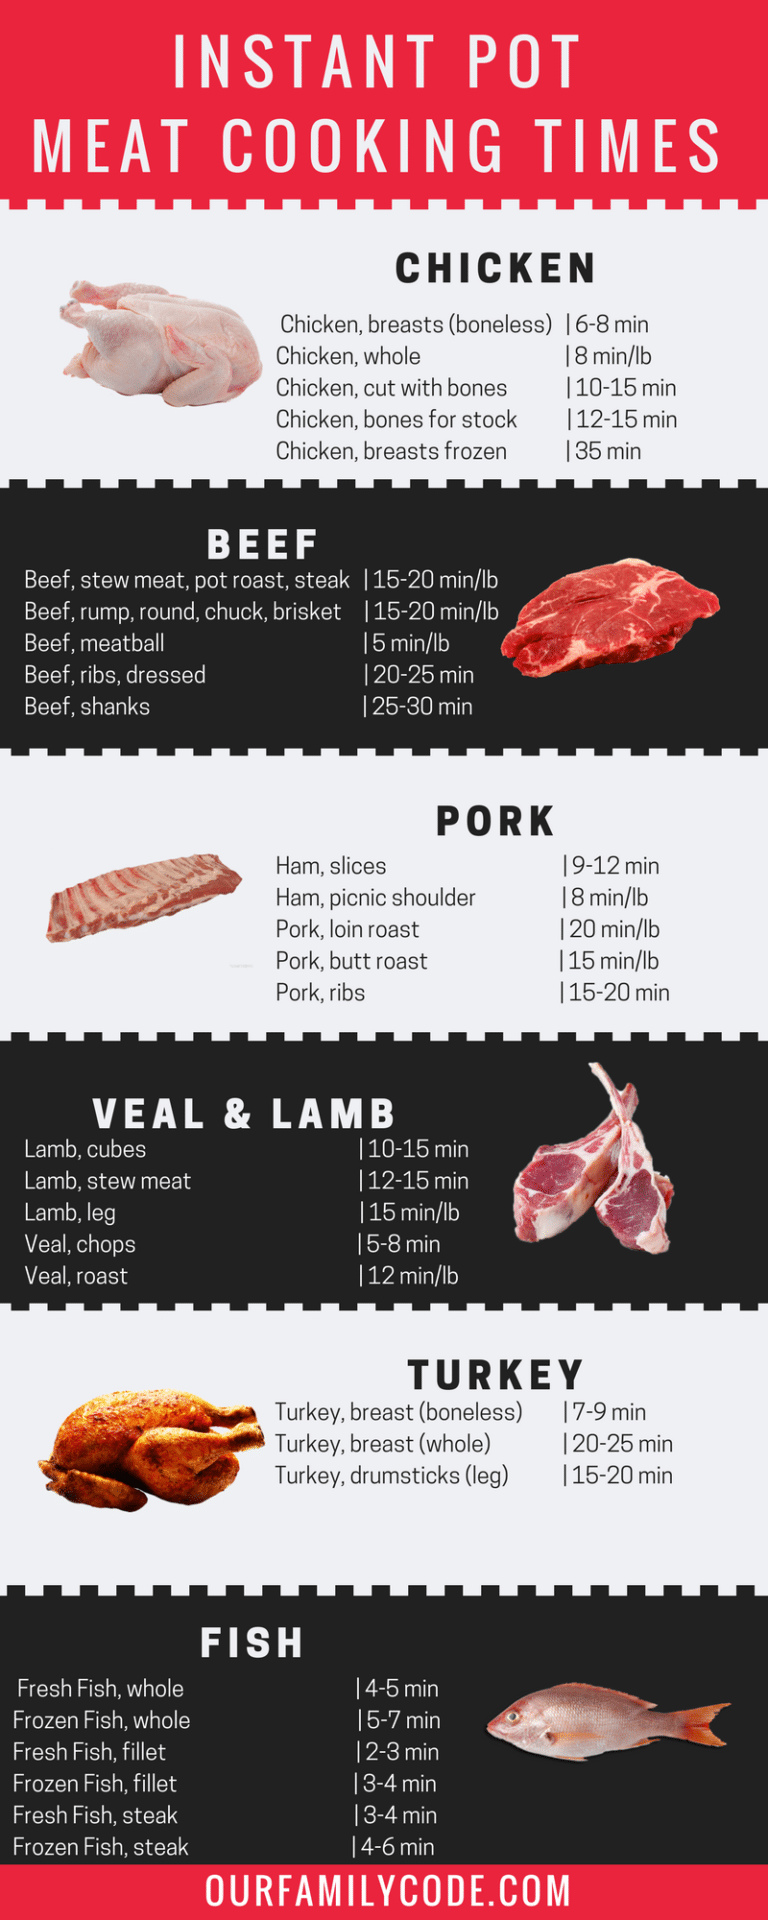 Get Your Free Instant Pot Meat Cooking Times Printable Here! - Our ...